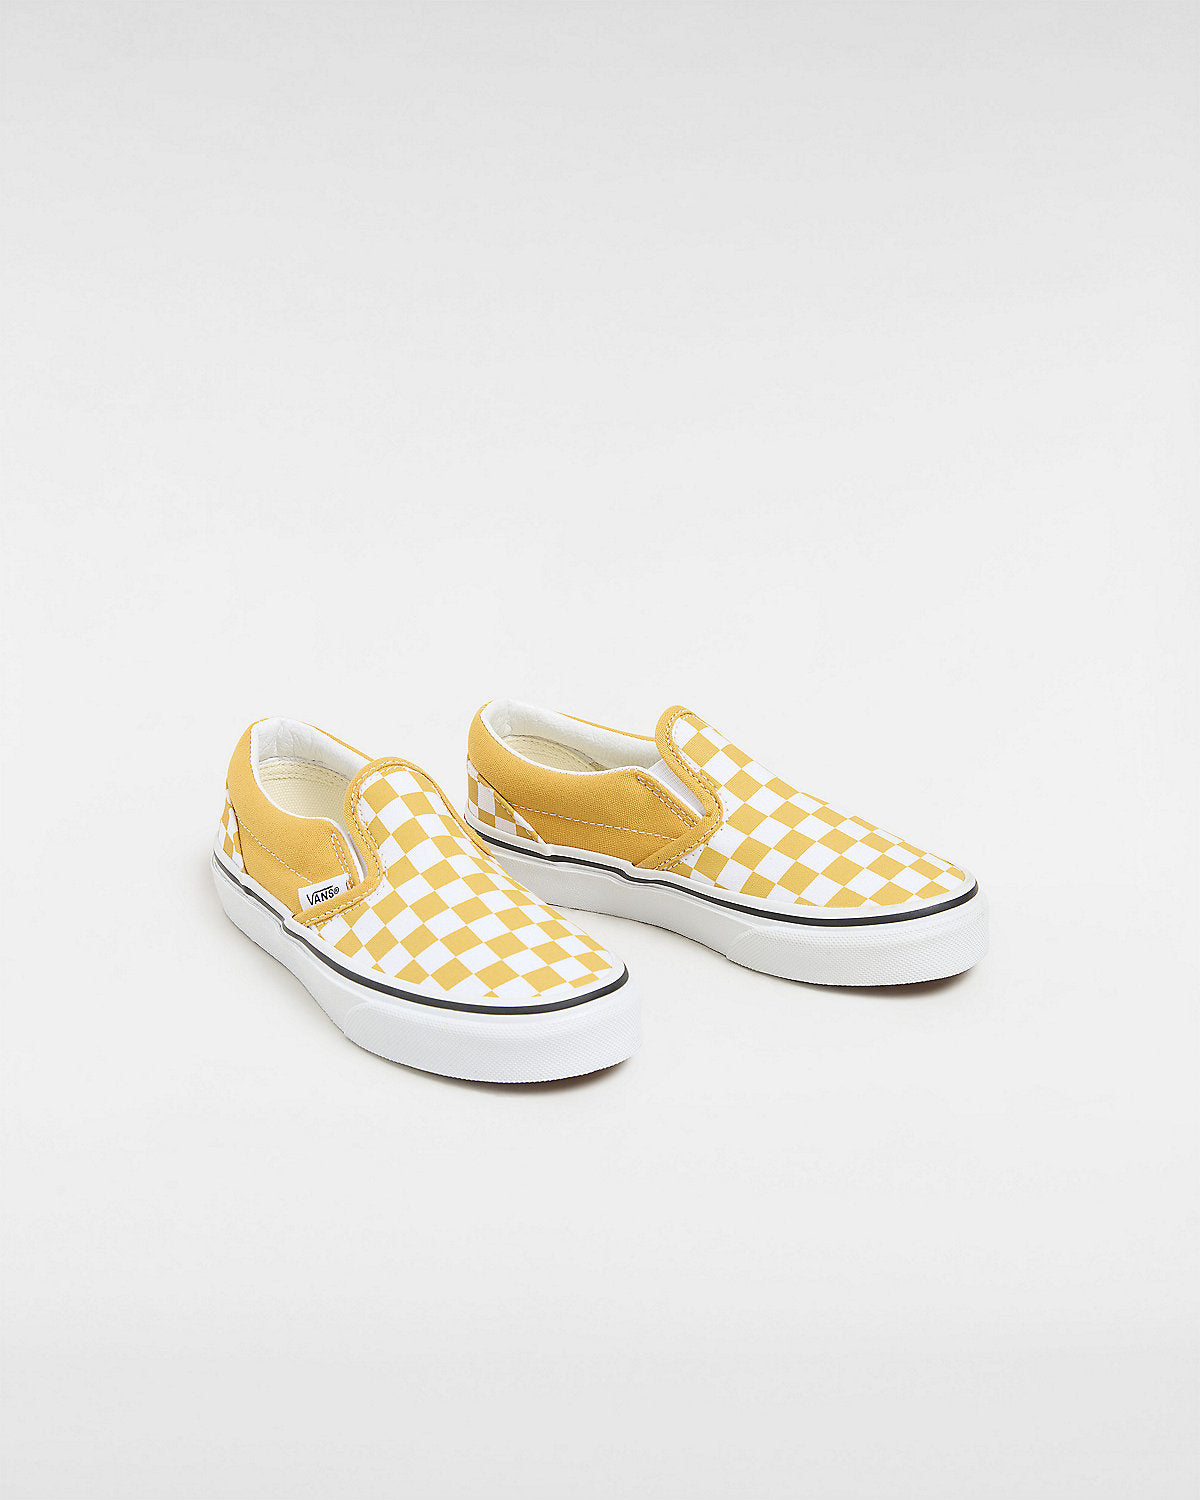 VANS Kids Classic Slip-On Color Theory Checkerboard Trainers - Golden Glow